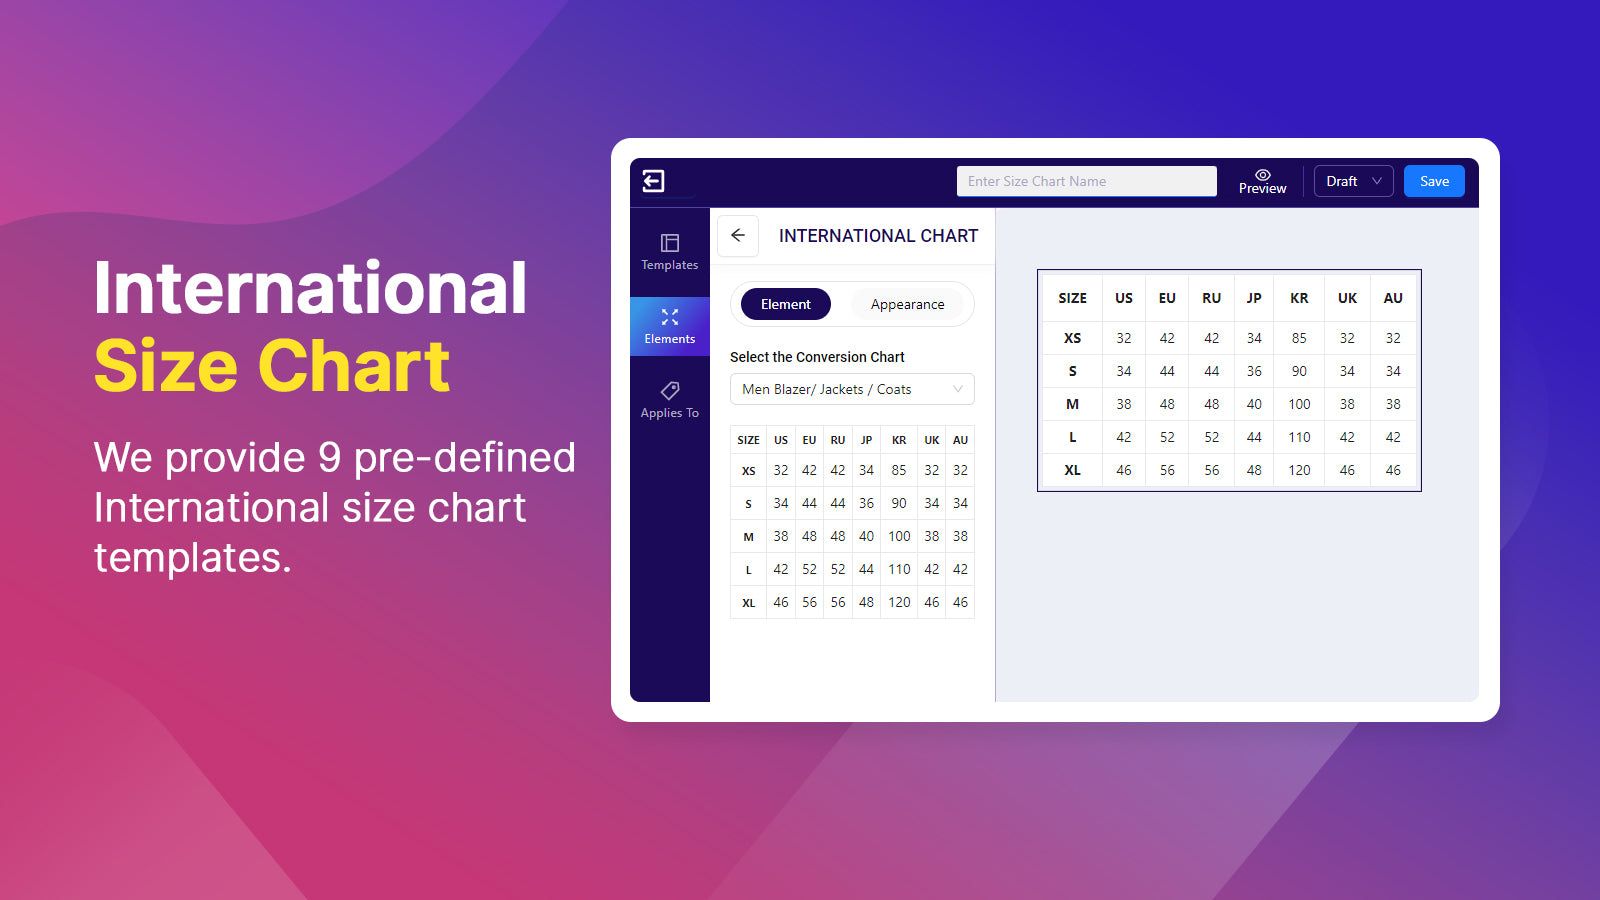 We provide 9 pre-defined International size chart templates